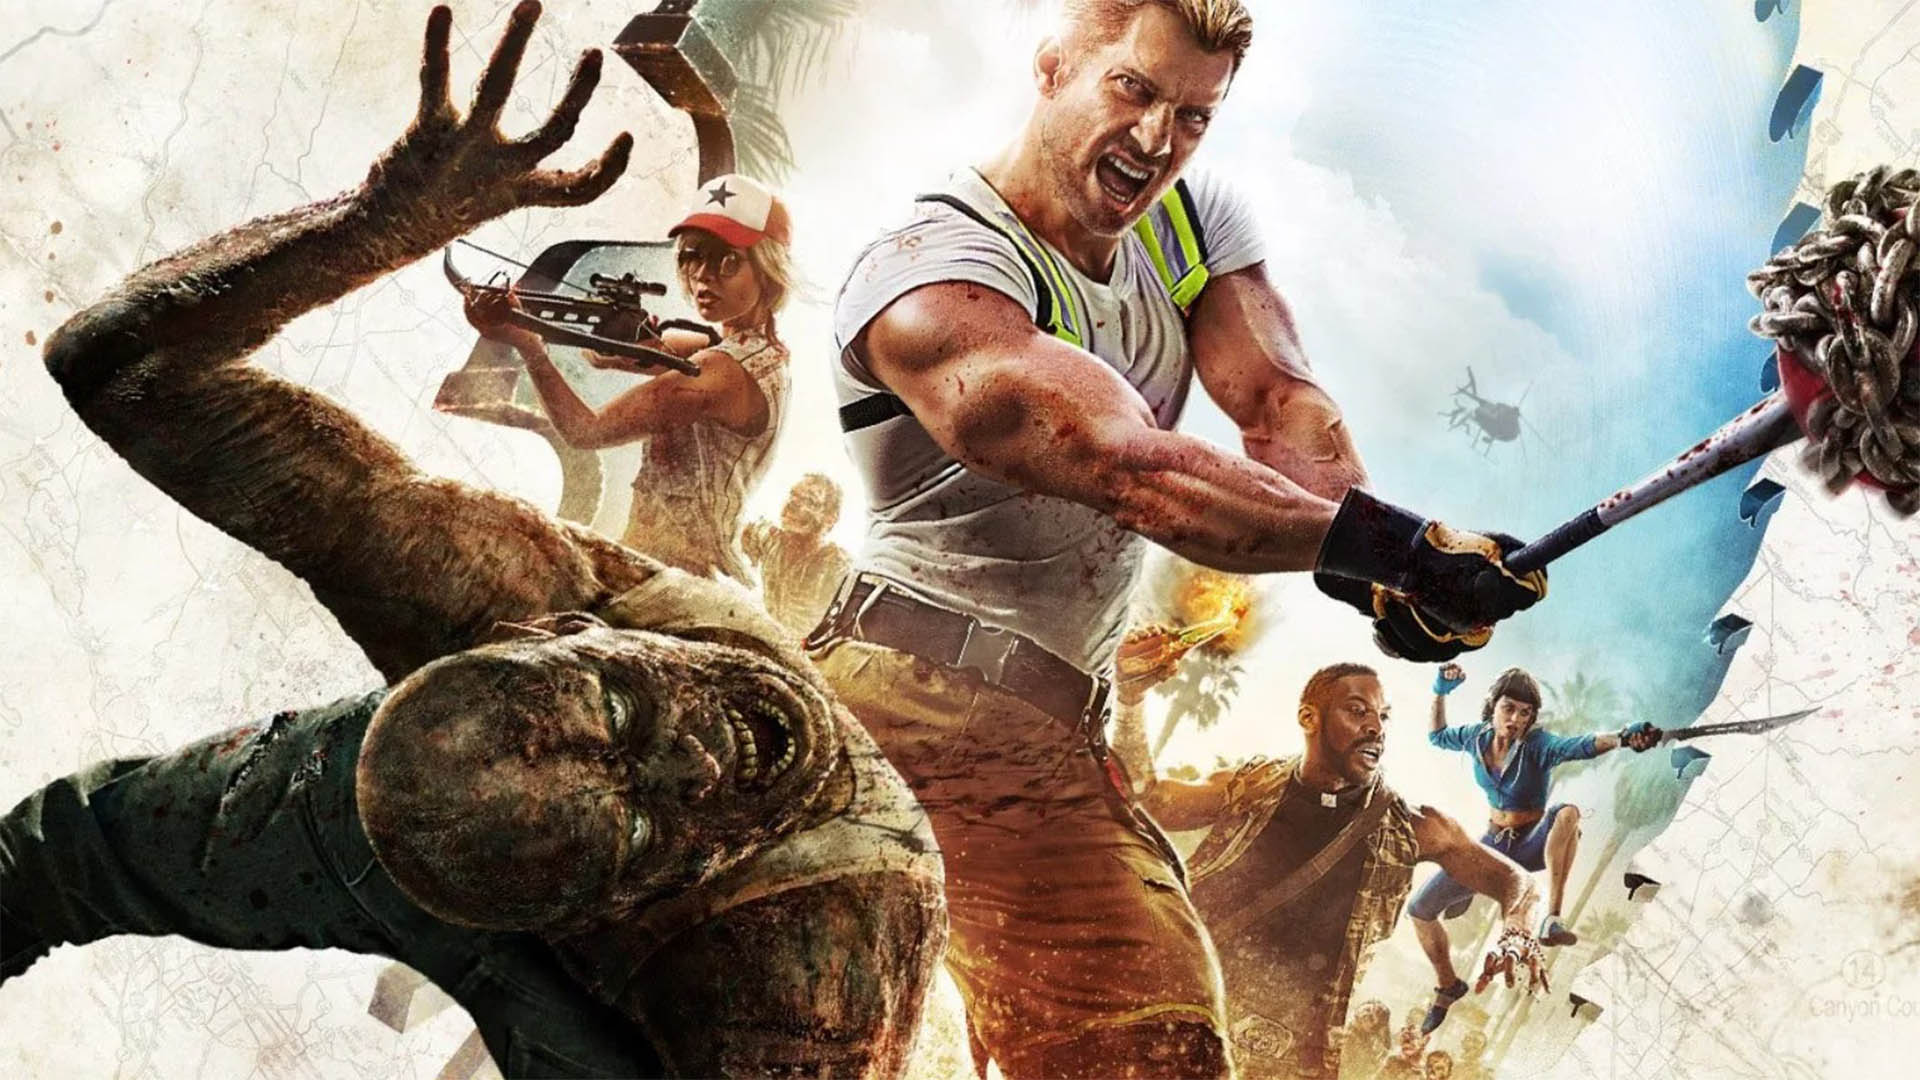 Screenshots, cover art and release date of Dead Island 2 leaked